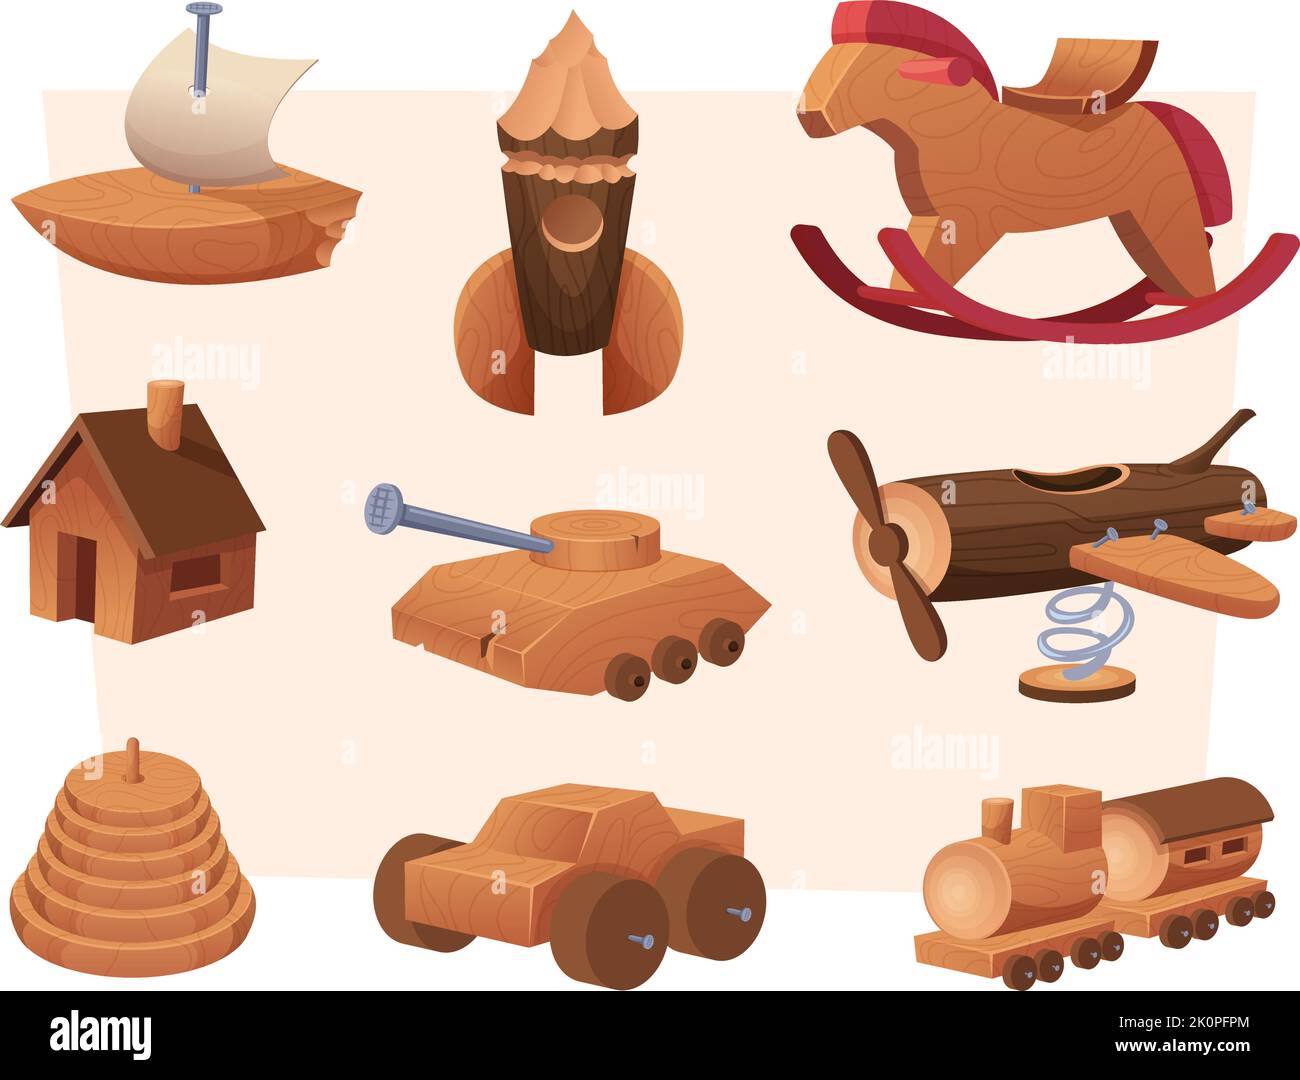 Wooden toys. Playground items collection for kids different toys soldiers cars bricks cubes and houses exact vector template Stock Vector